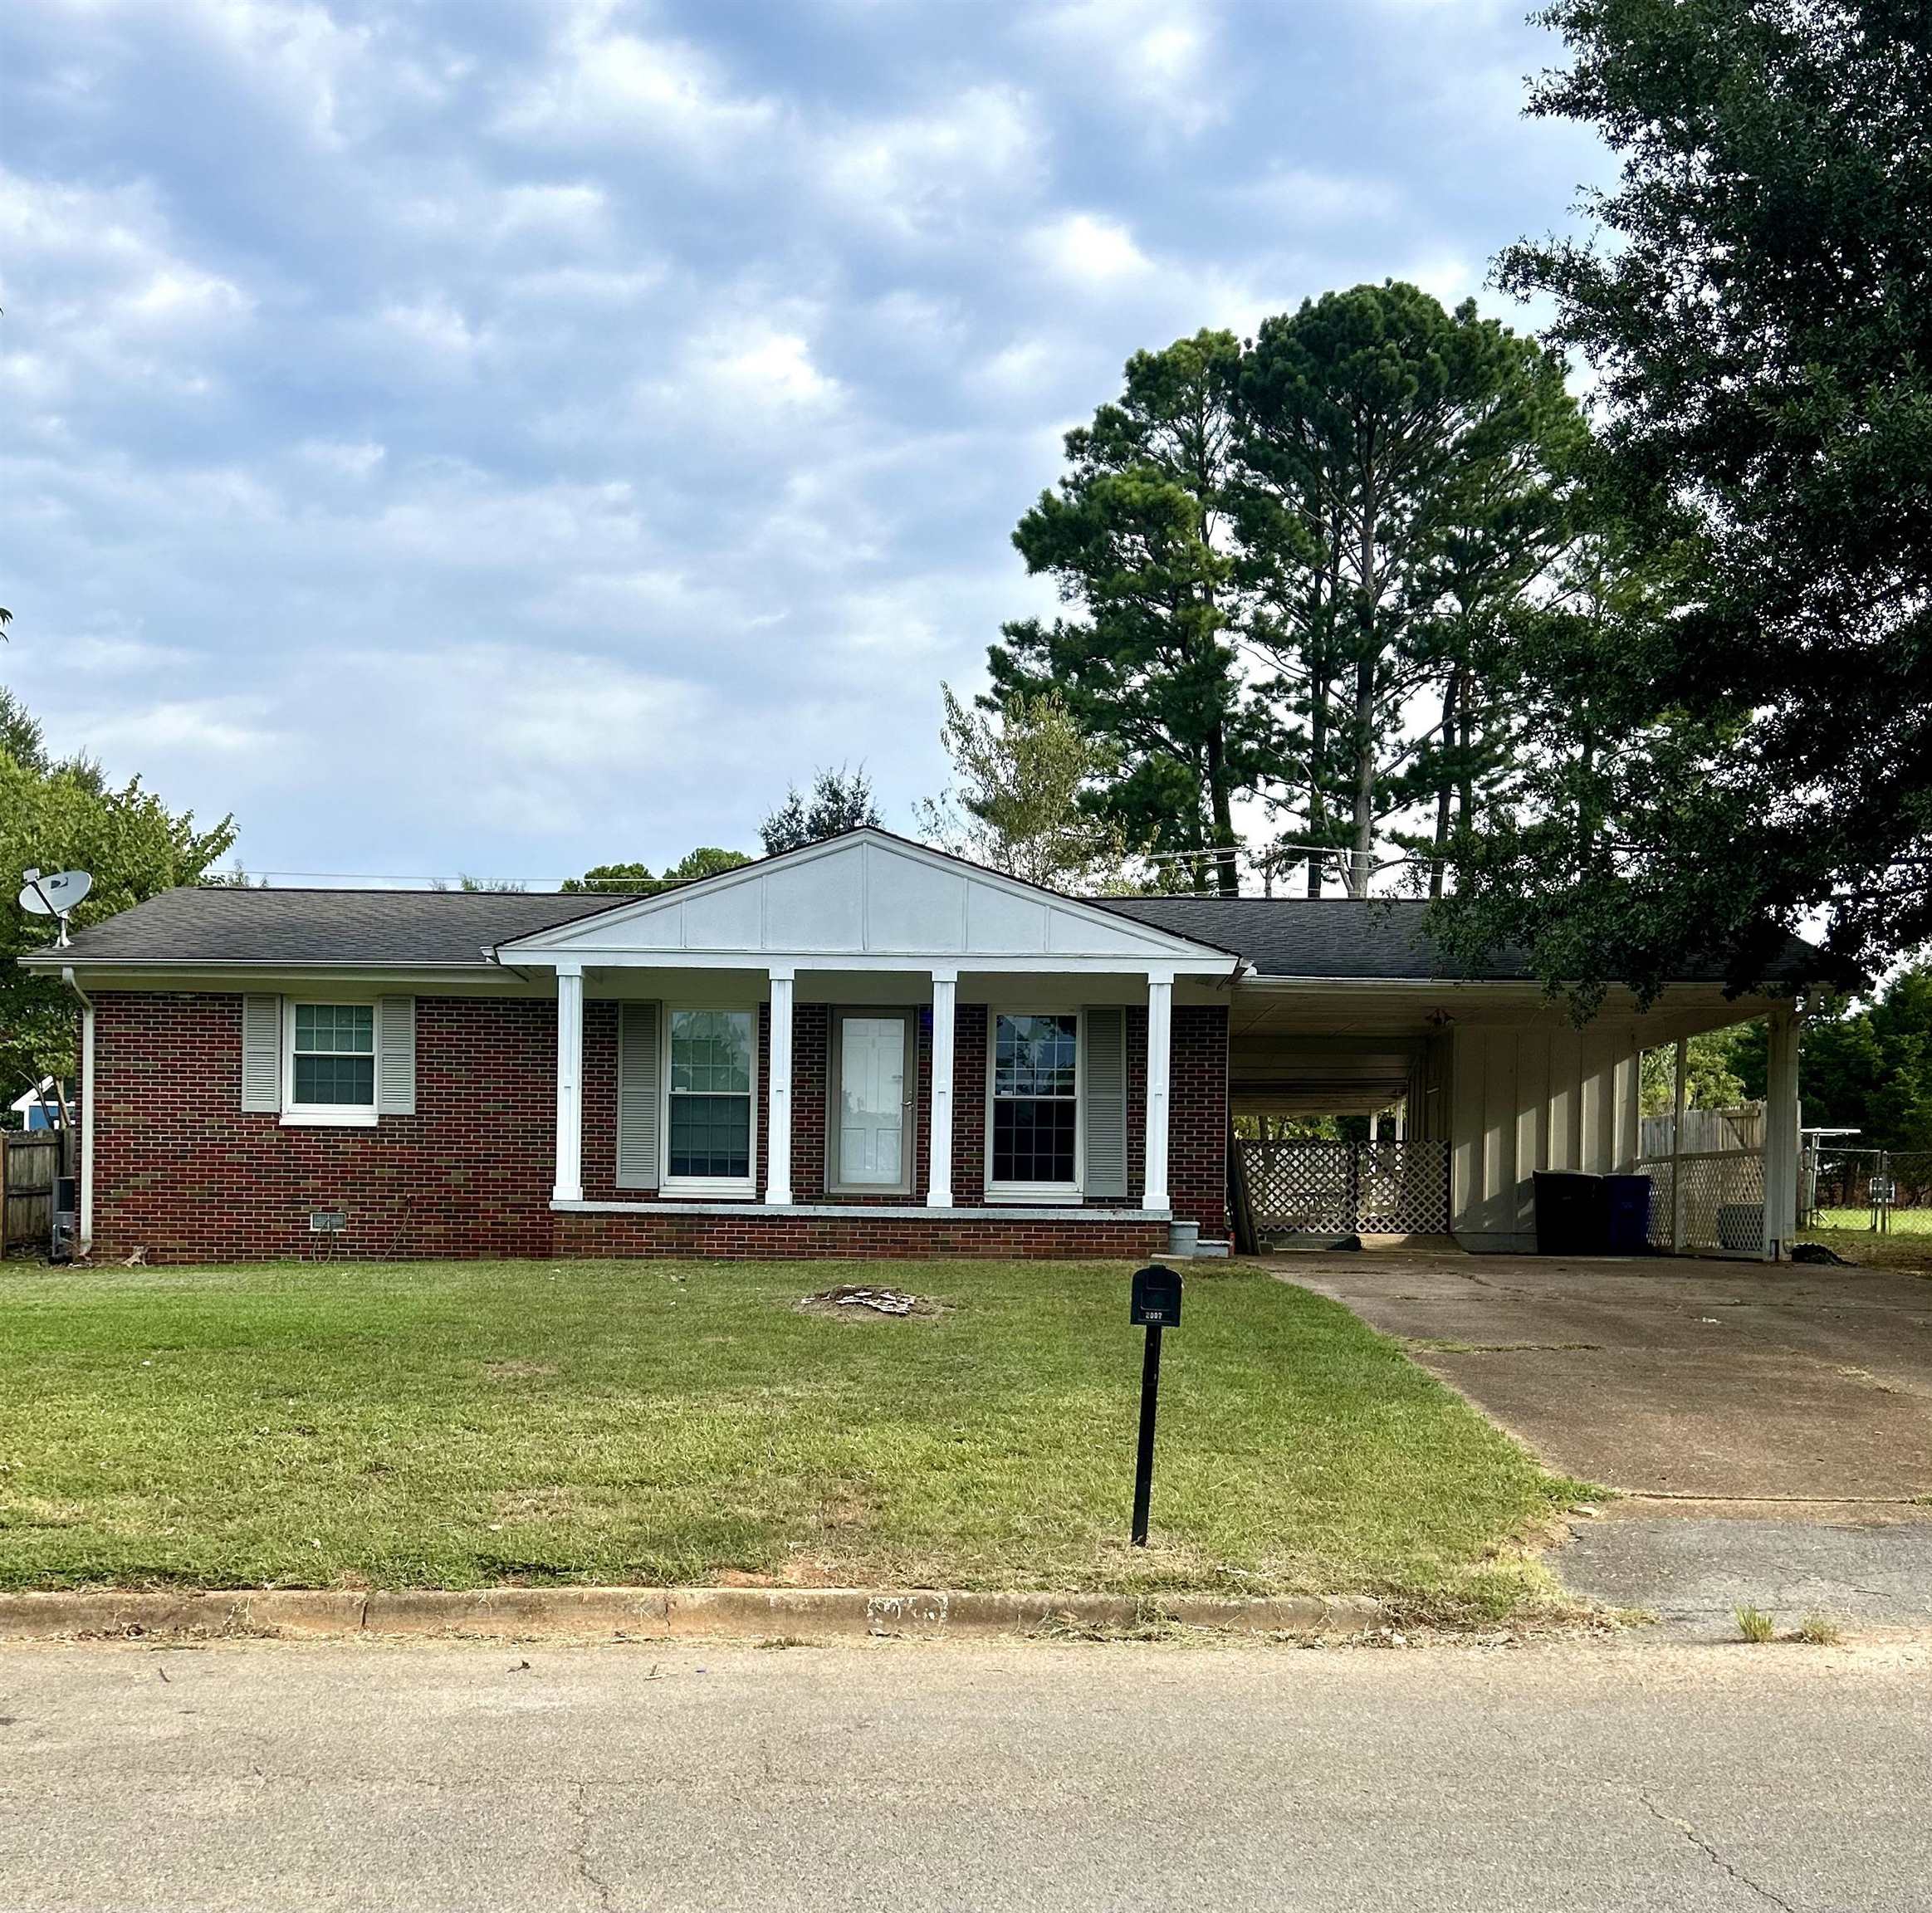 Located within minutes of the mall, downtown and UNA this 3 bedroom, 2 bath ranch is perfect for first time homwowners.  Enjoy the large, covered patio located off the 2-car carport.  The fenced backyard is perfect for children or pets to play.  Call to schedule your private showing today!  Sold as is.